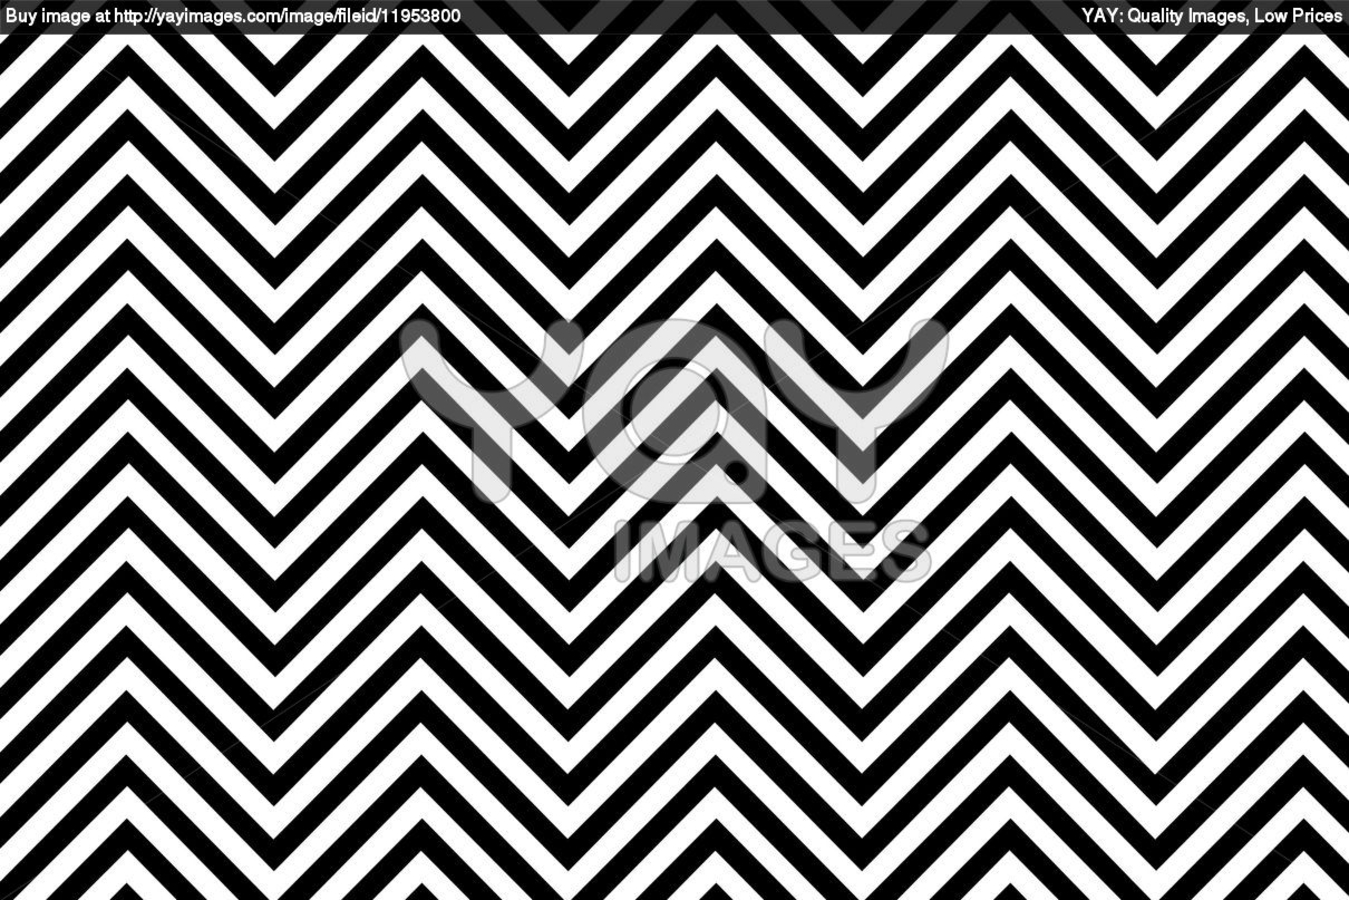 Wallpaper Trendy Chevron Patterned Background Black And White